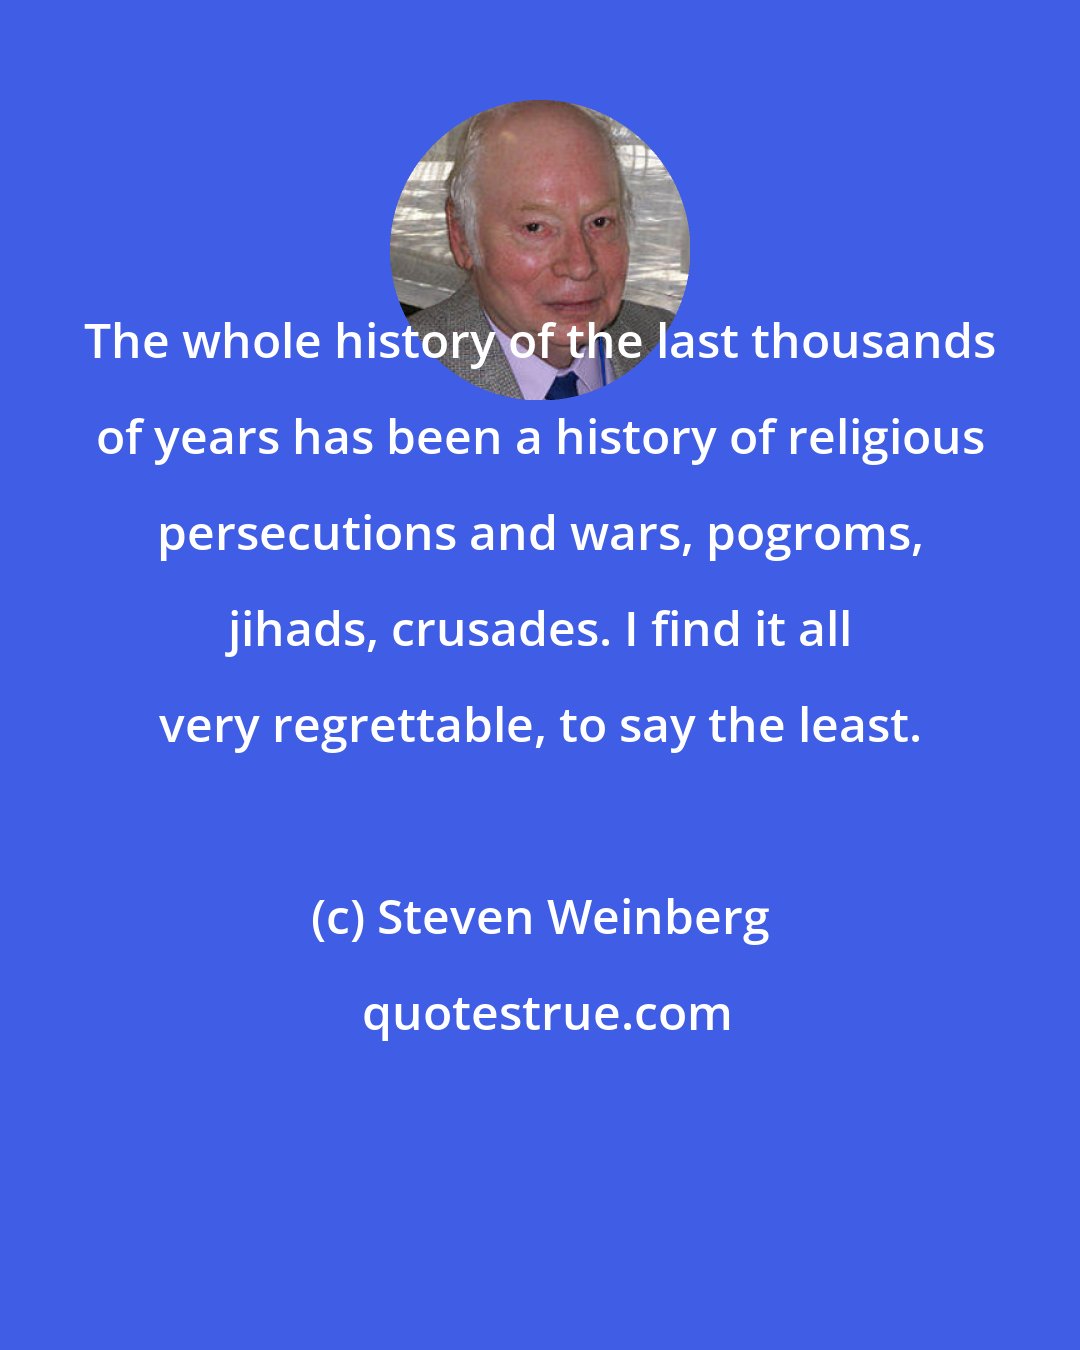 Steven Weinberg: The whole history of the last thousands of years has been a history of religious persecutions and wars, pogroms, jihads, crusades. I find it all very regrettable, to say the least.